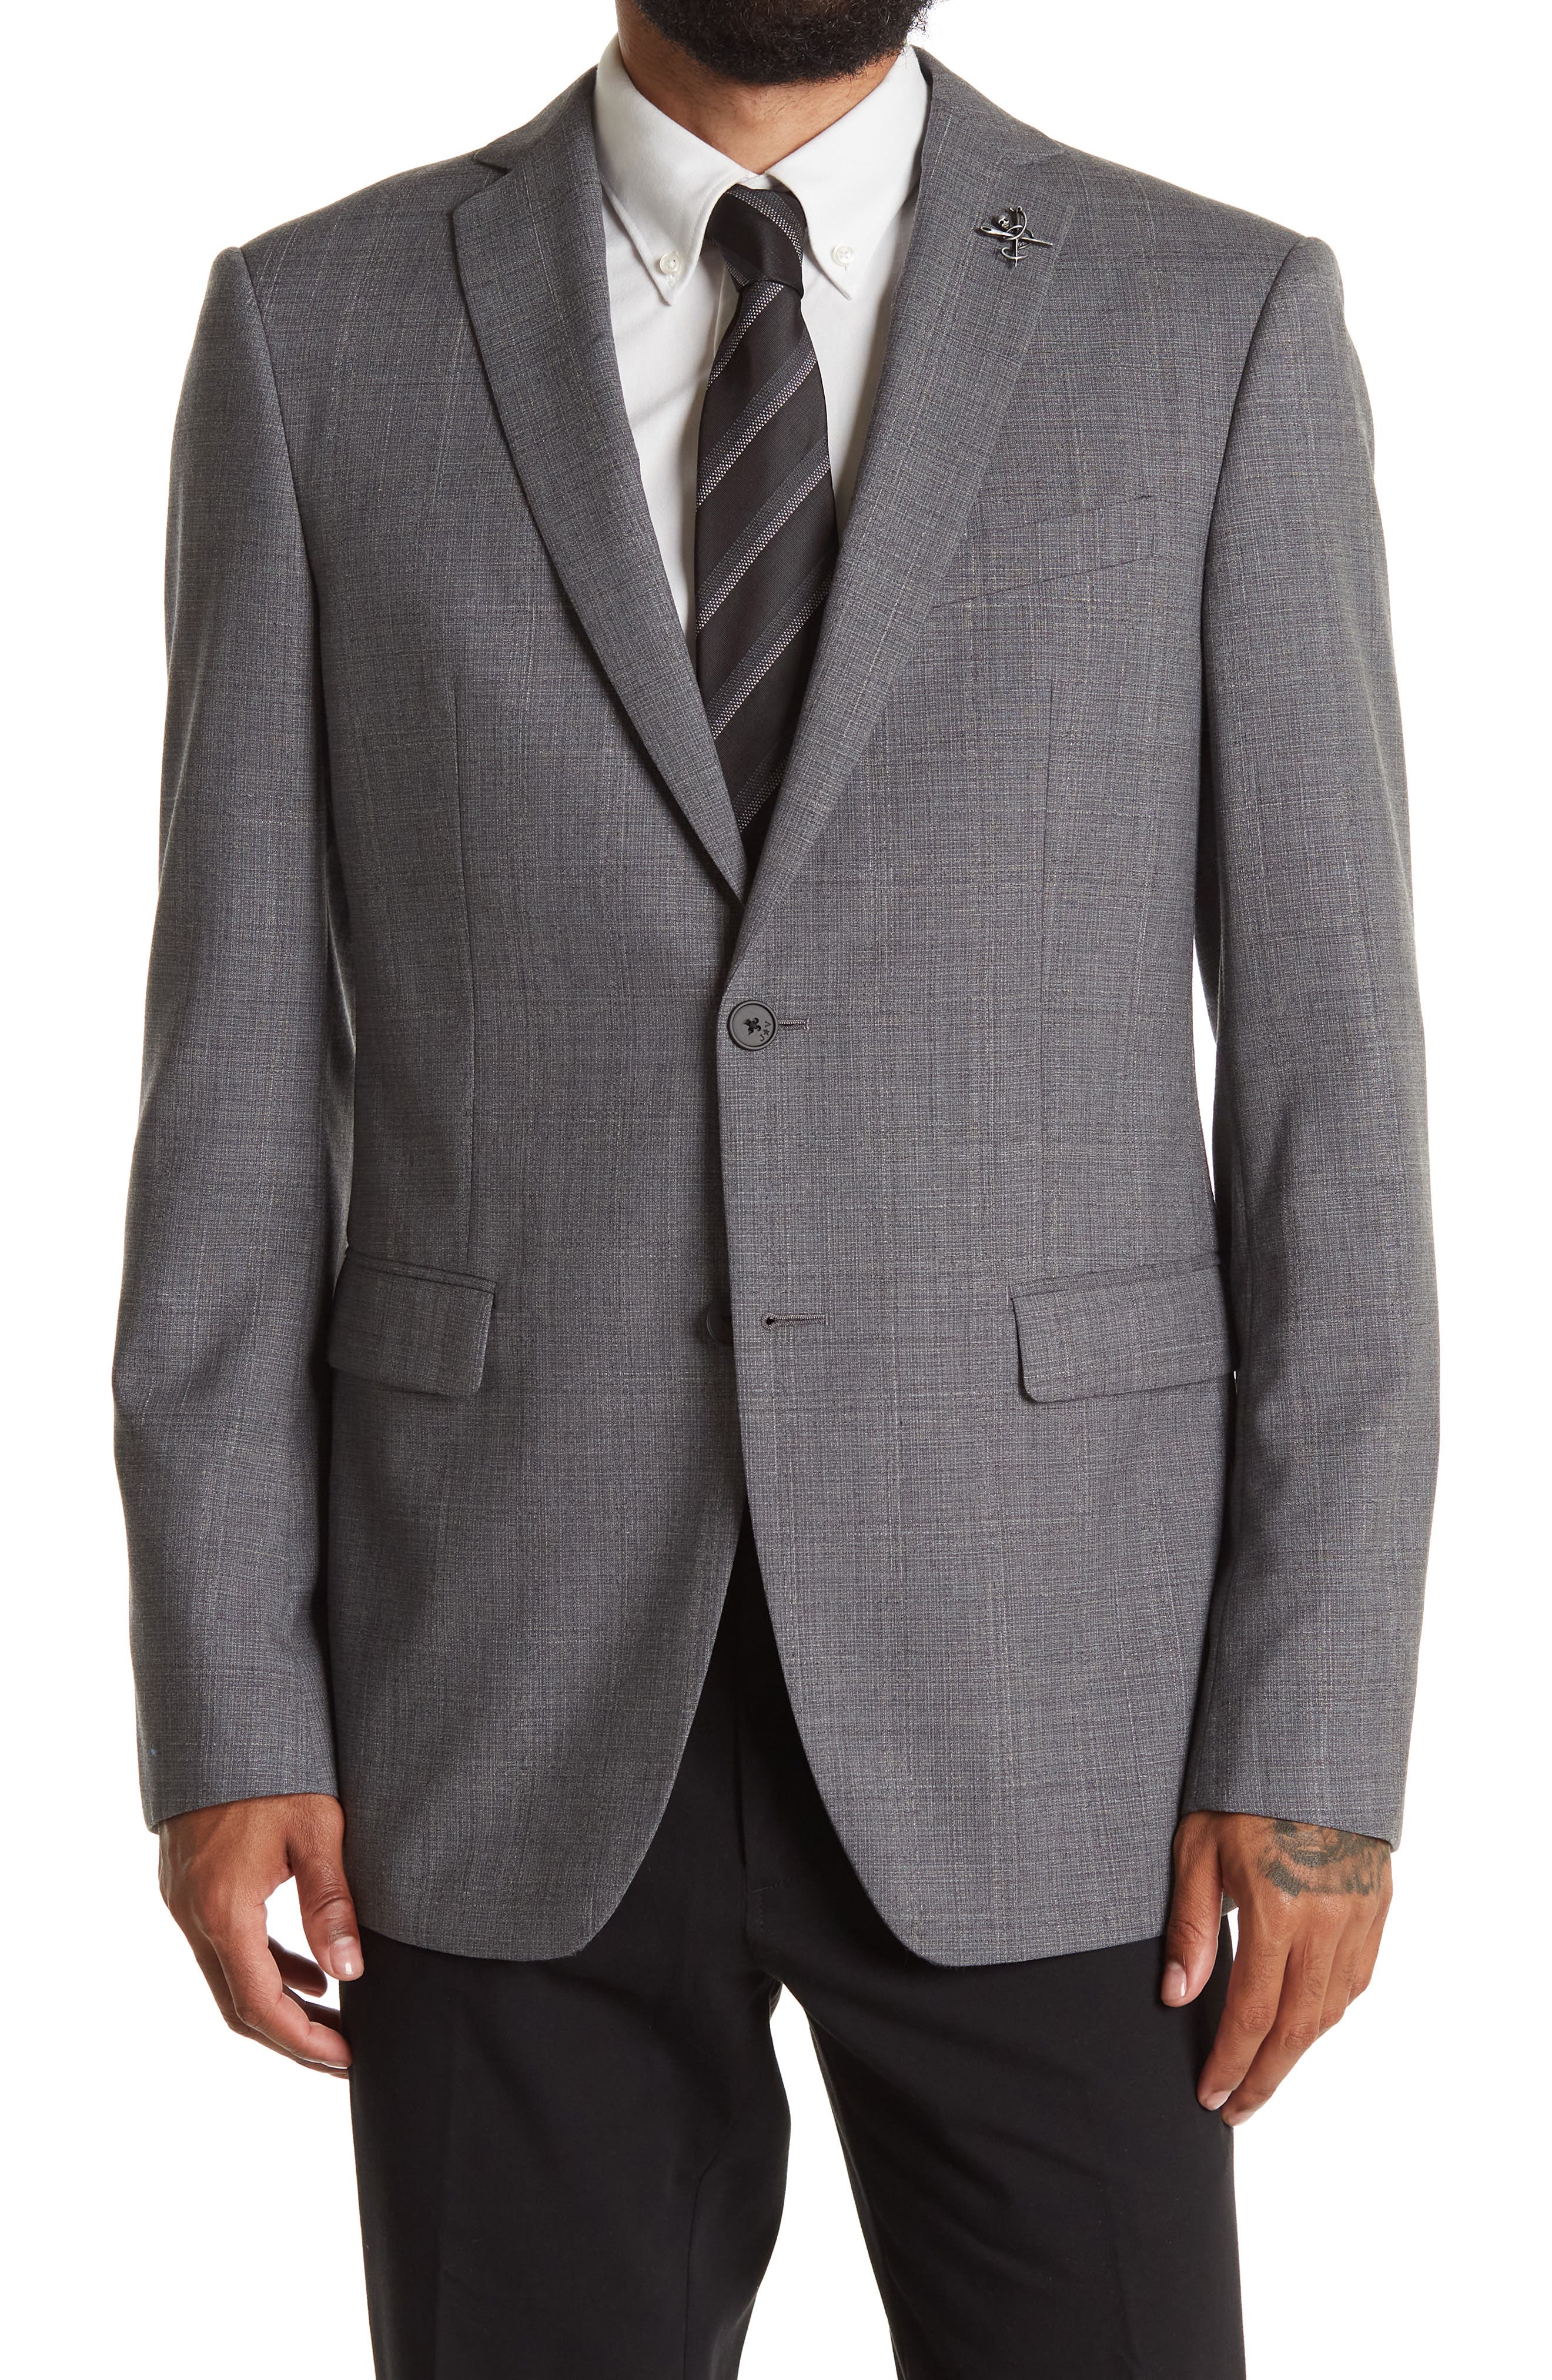 John Varvatos Bedford Plaid Print Two Button Notch Lapel Sport Coat in Grey at Nordstrom